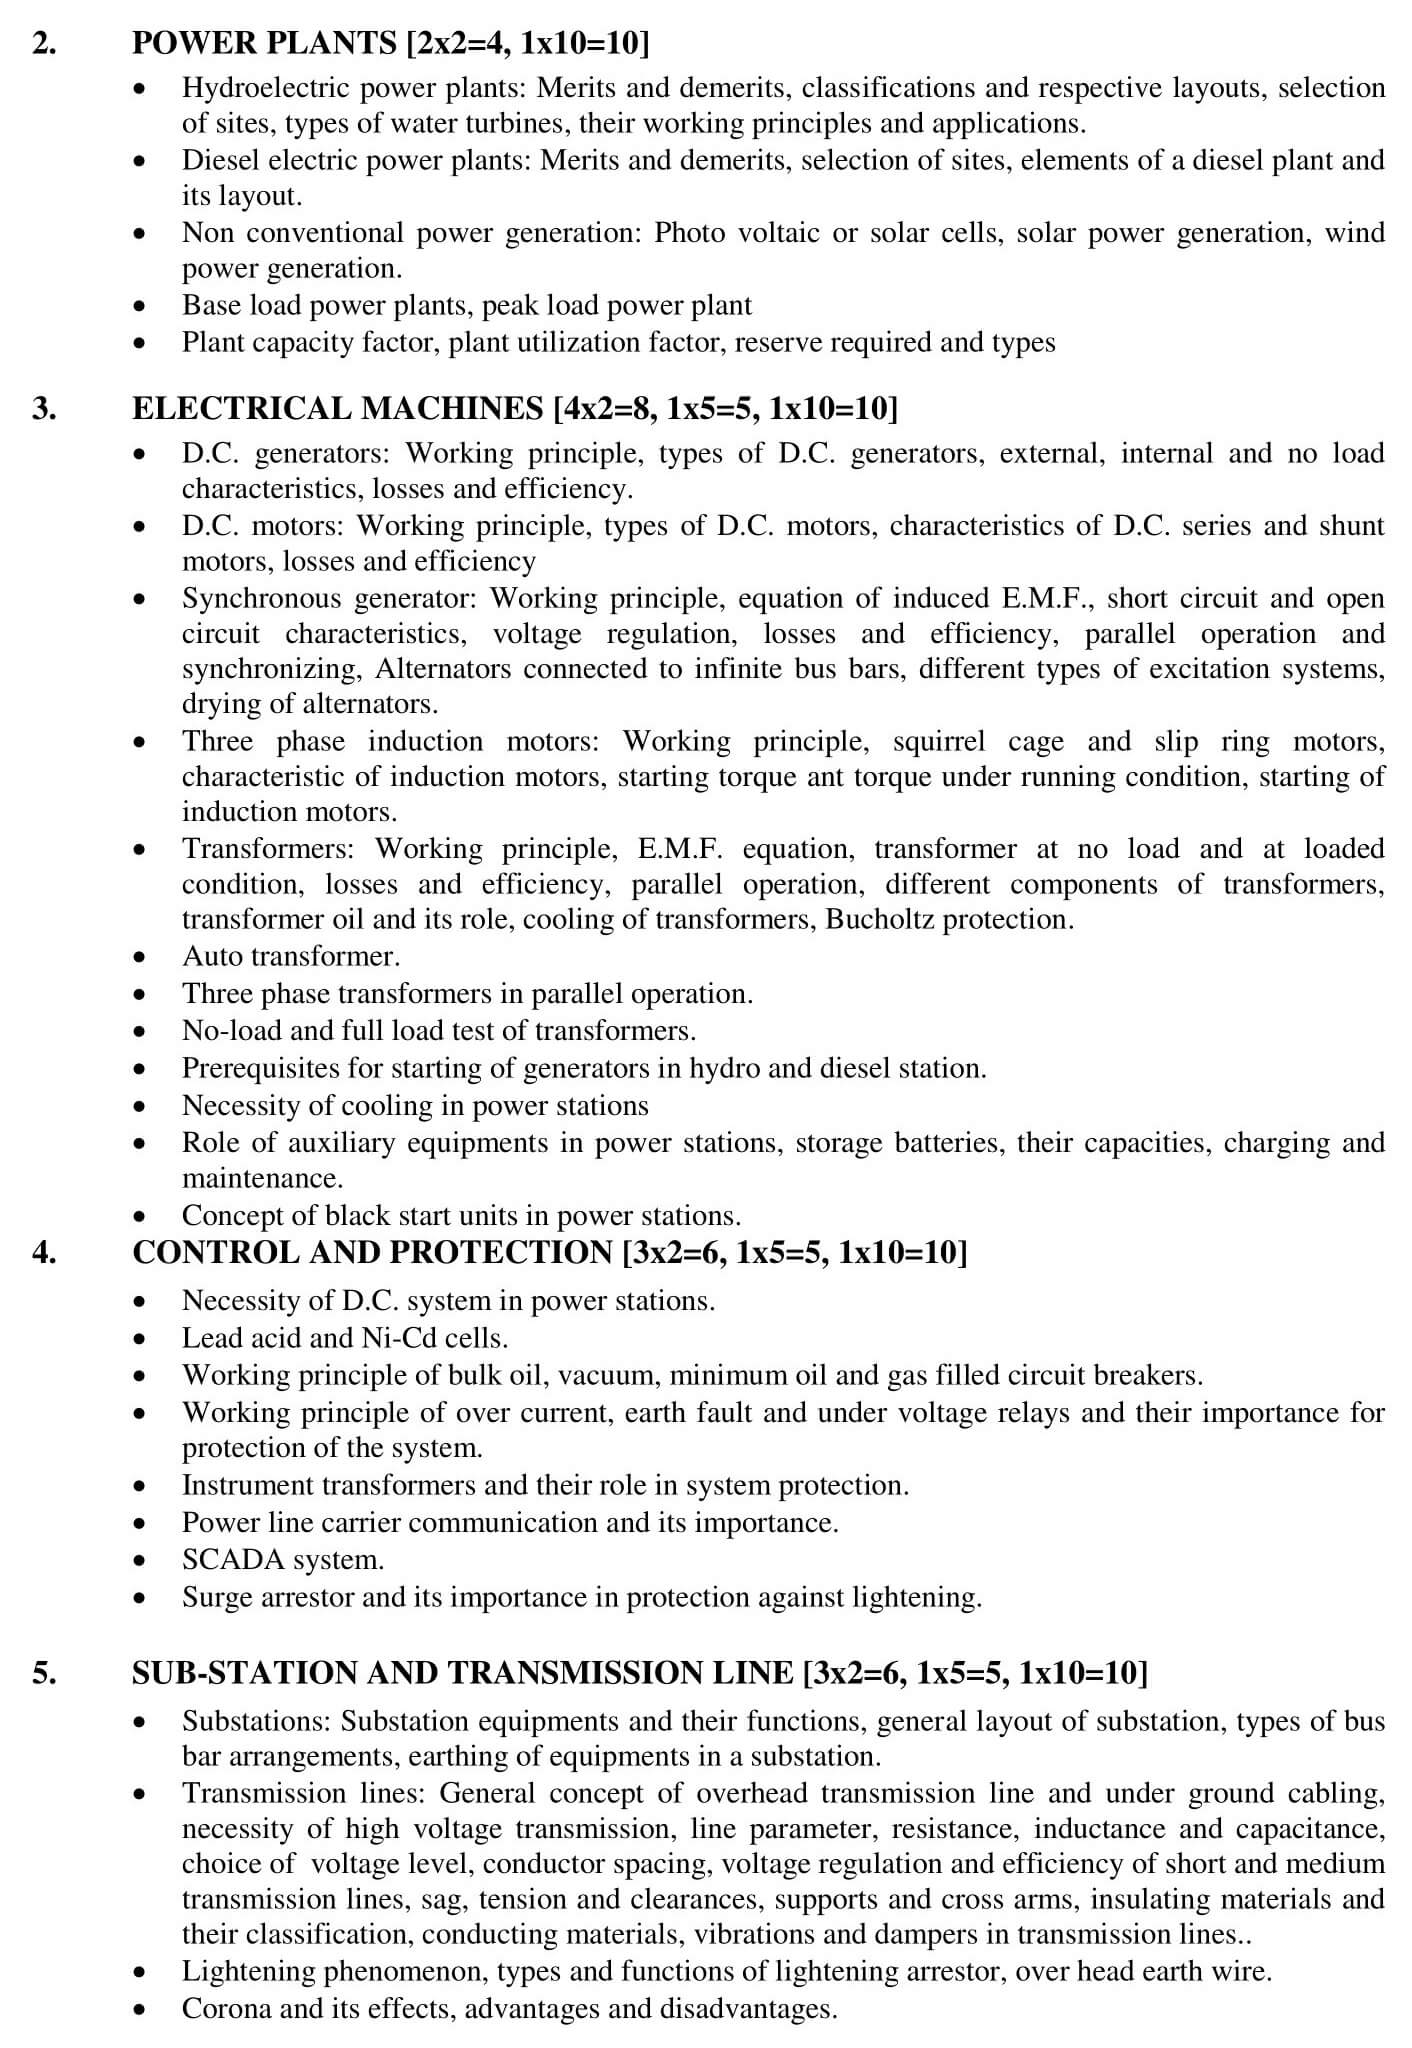 Nepal Electricity Authority - NEA Syllabus Department: Administrations Rank: Level 5 Electrical Supervisor Date: 2074/09/03. NEA Syllabus Electrical Supervisor PDF Download